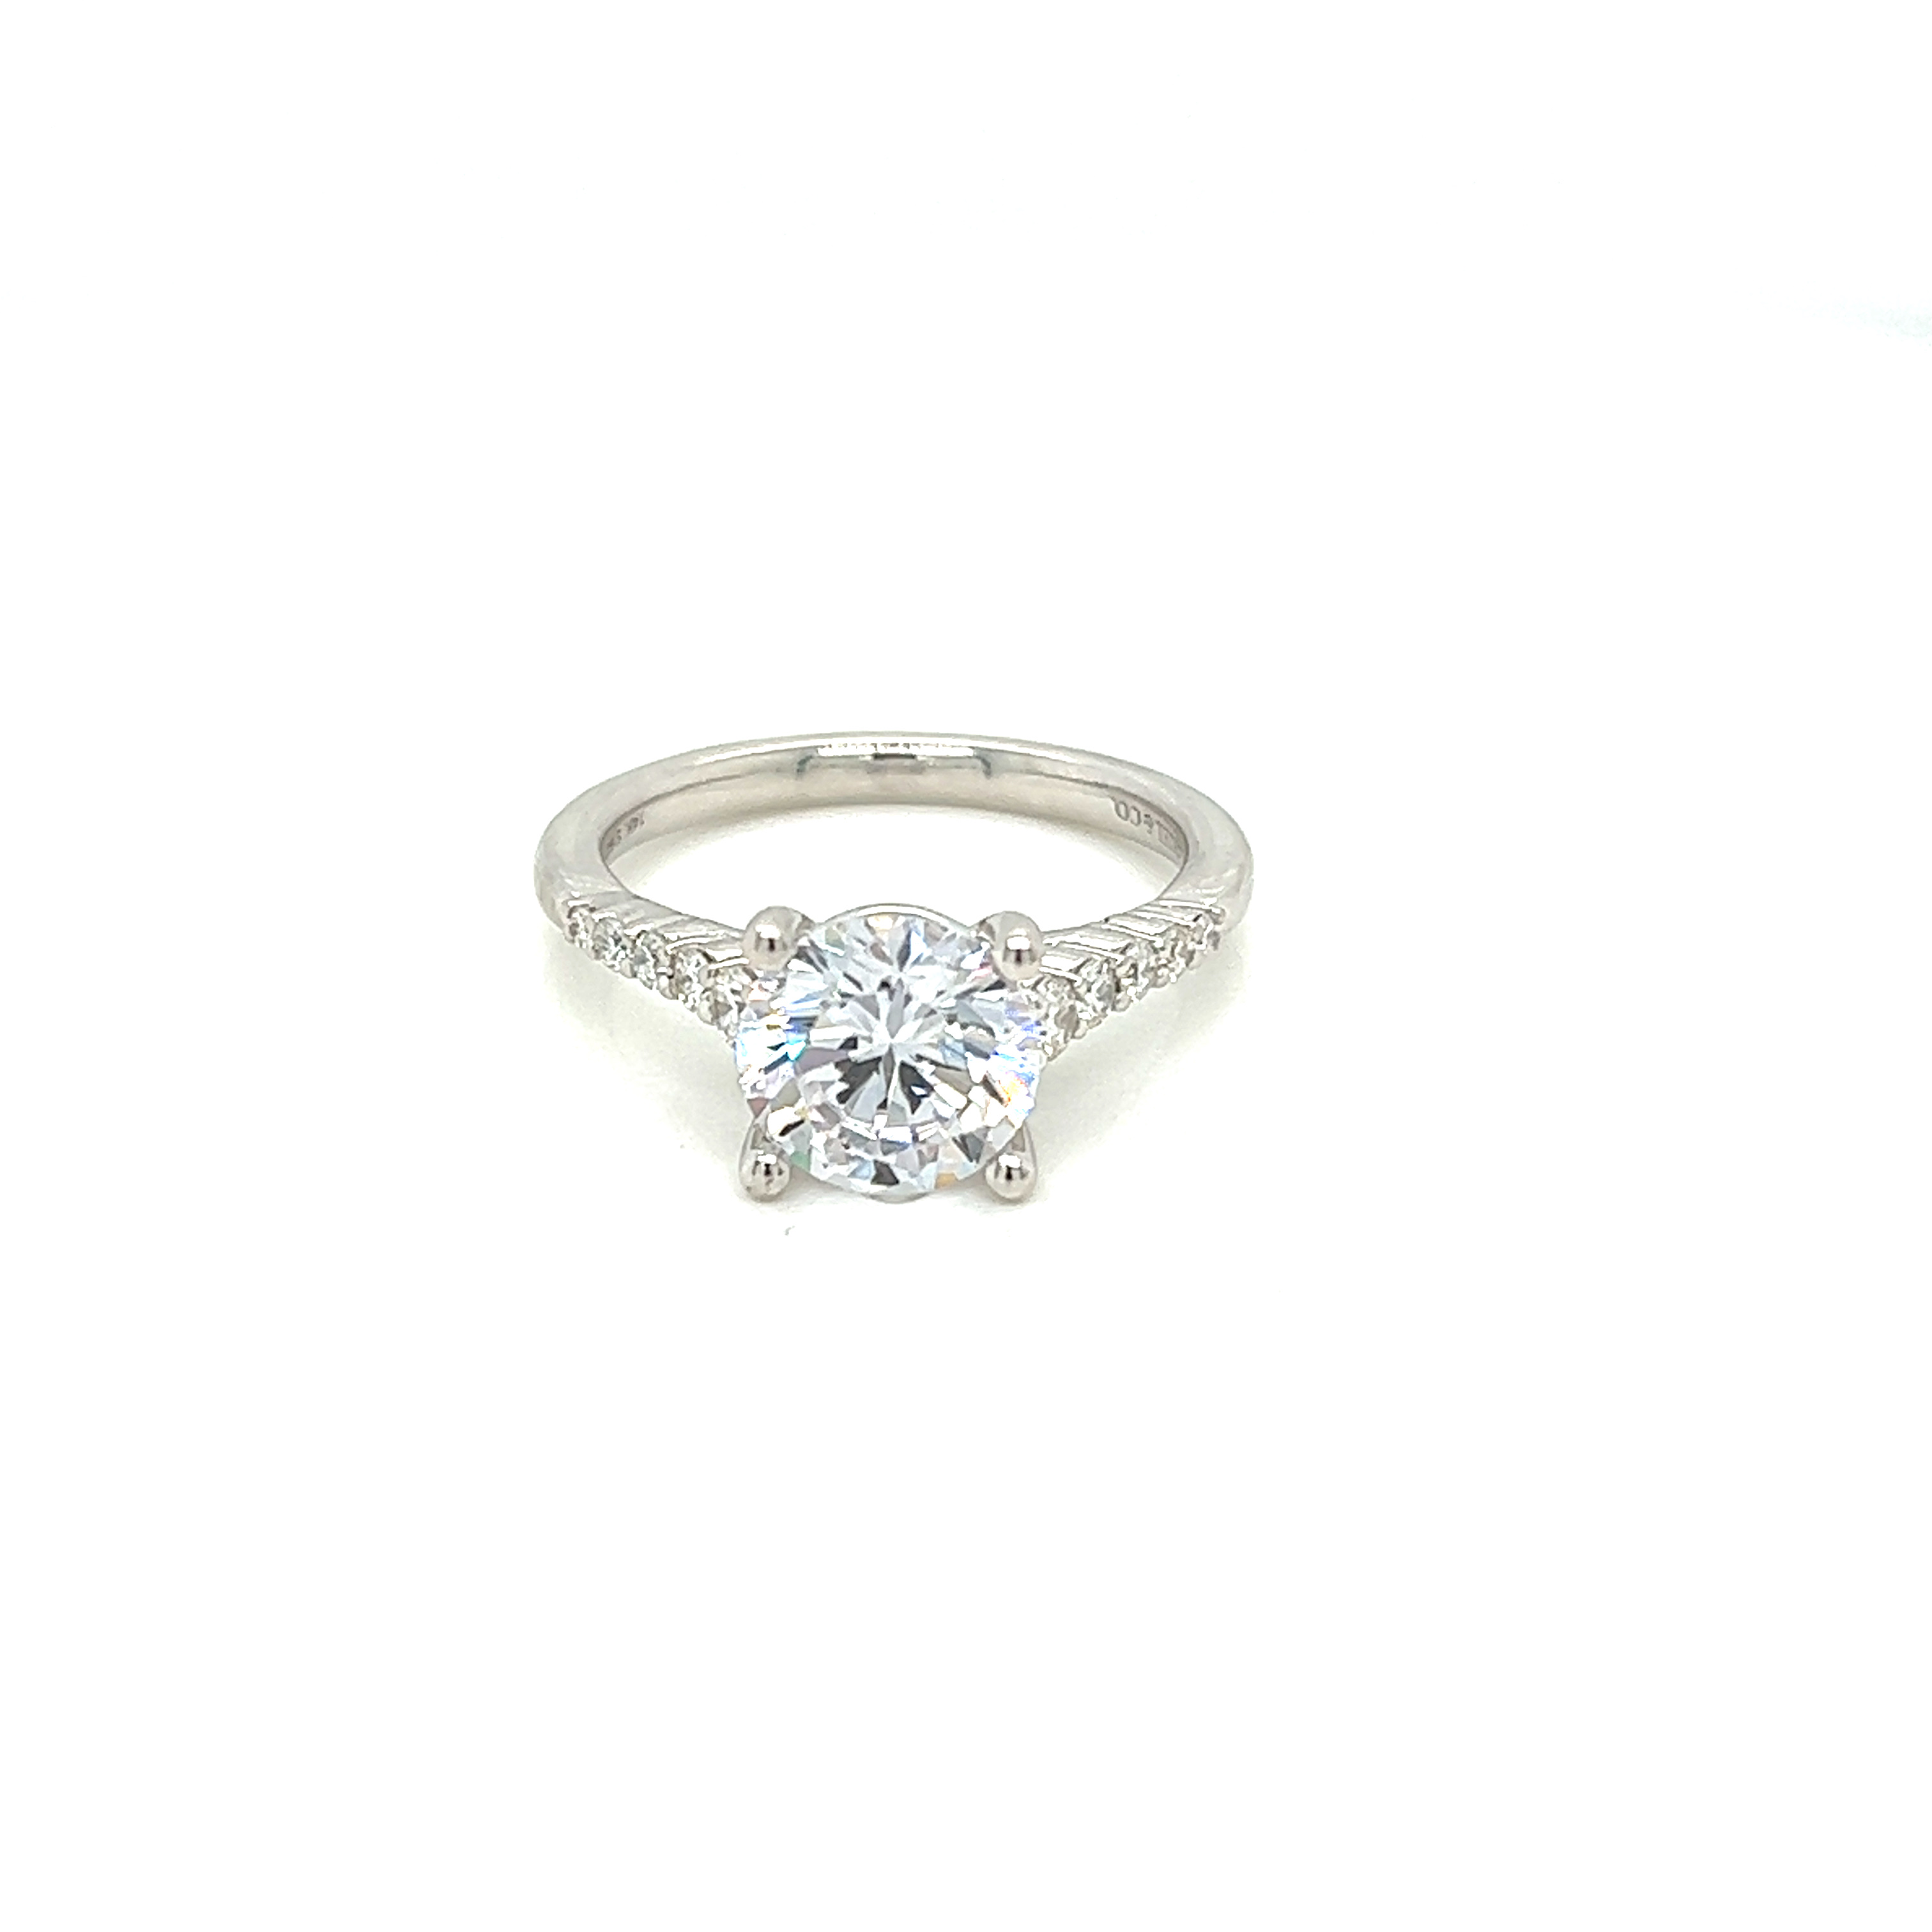 14 Karat white gold semi mount engagement ring Size 6.5 with 10=0.25 total weight round brilliant G VS Diamonds